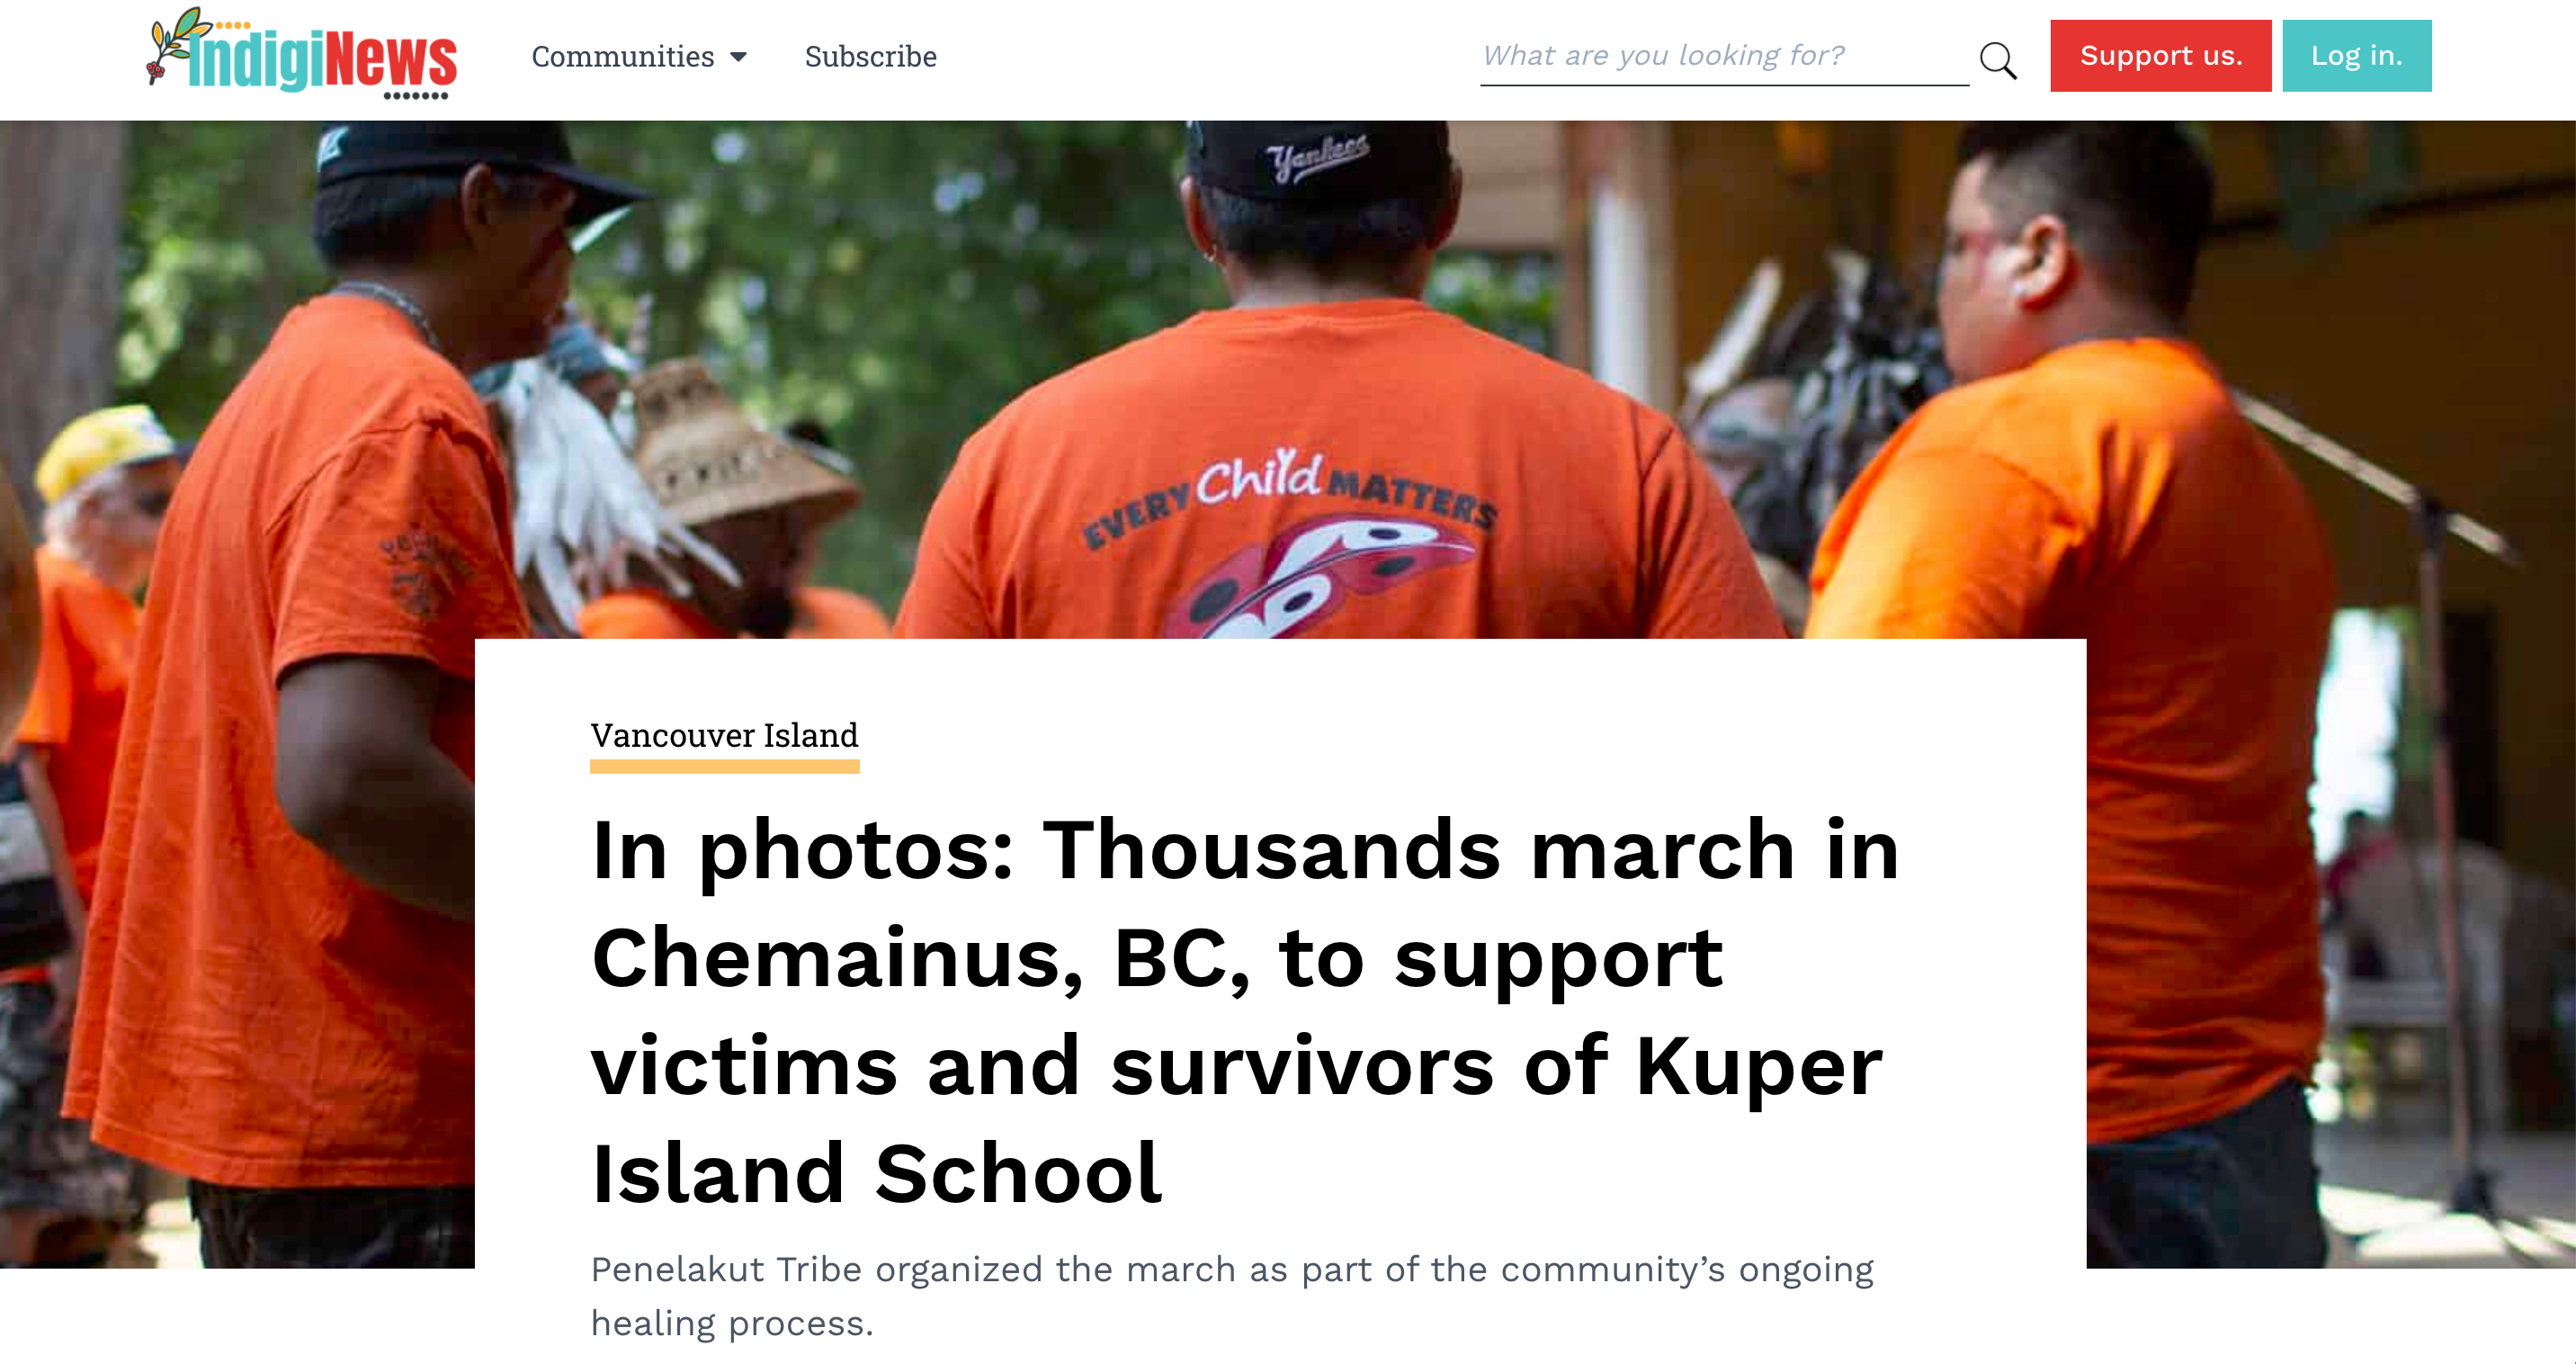 IndigiNews: 'In photos: Thousands march in Chemainus, BC, to support victims and survivors of Kuper Island School'